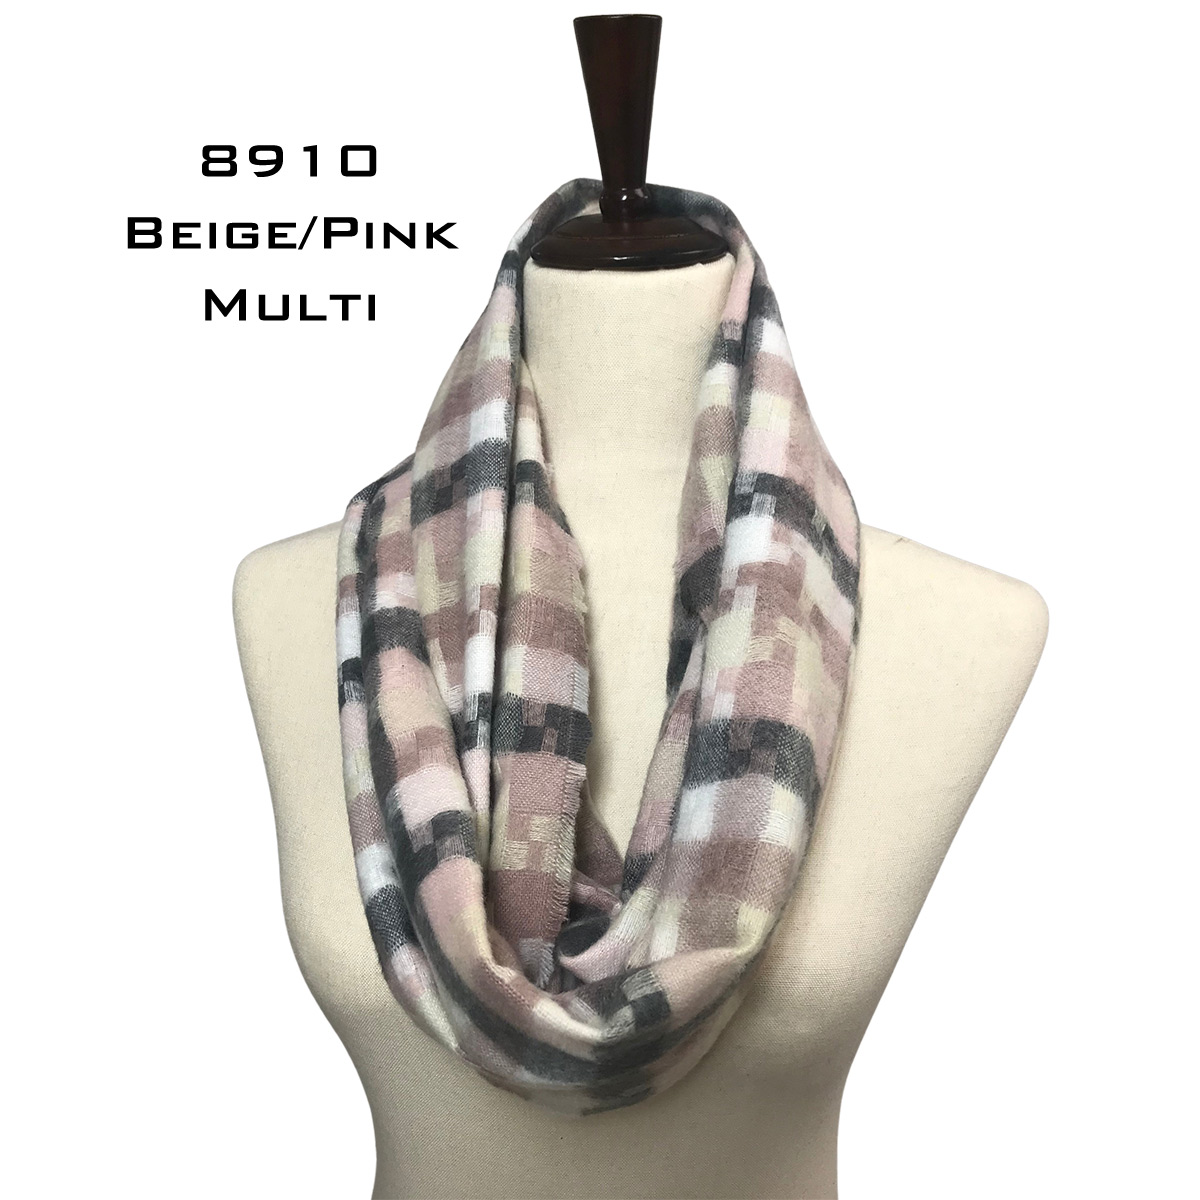 9810 BEIGE/PINK MULTI CHECKERED PLAID Knit Infinity Scarf